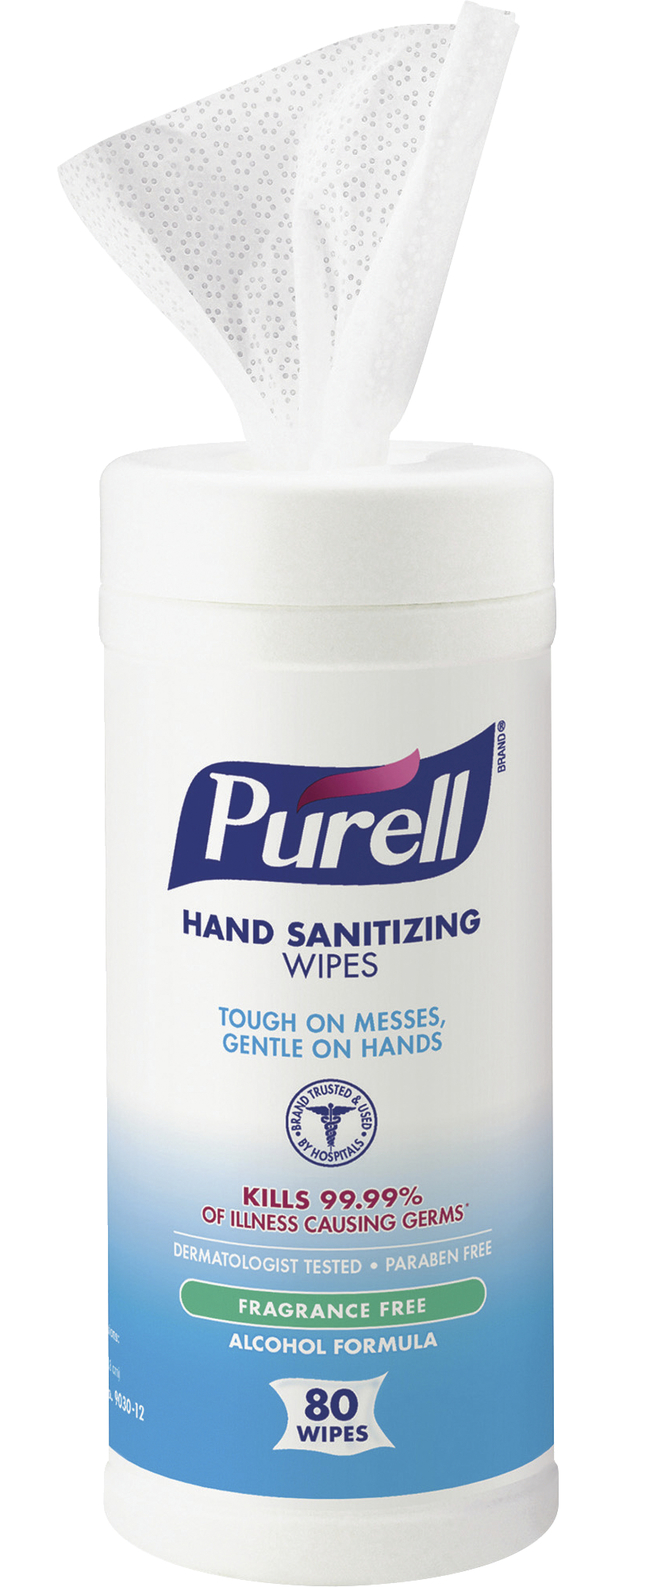 Purell Alcohol Hand Sanitizing Wipes, 80 Wipes, White, White, Item Number 1535369